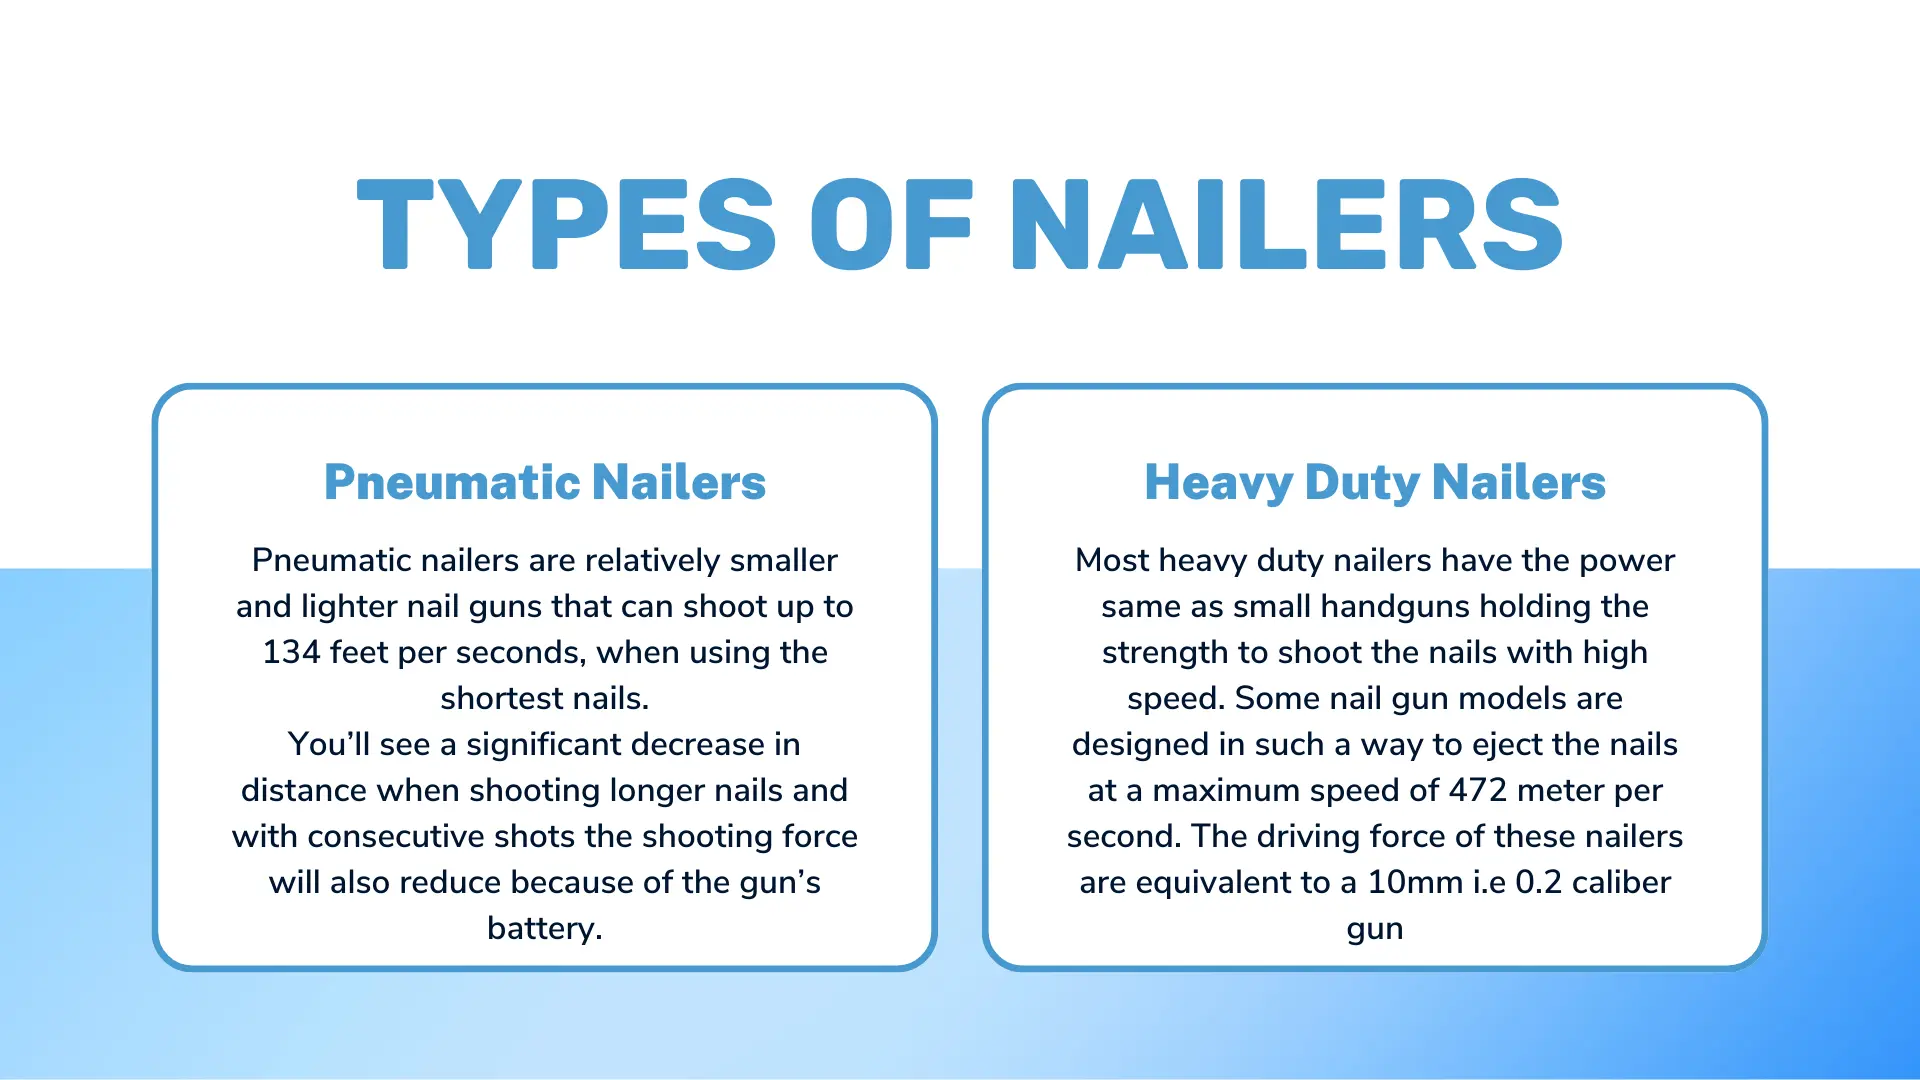 Types of Nailers